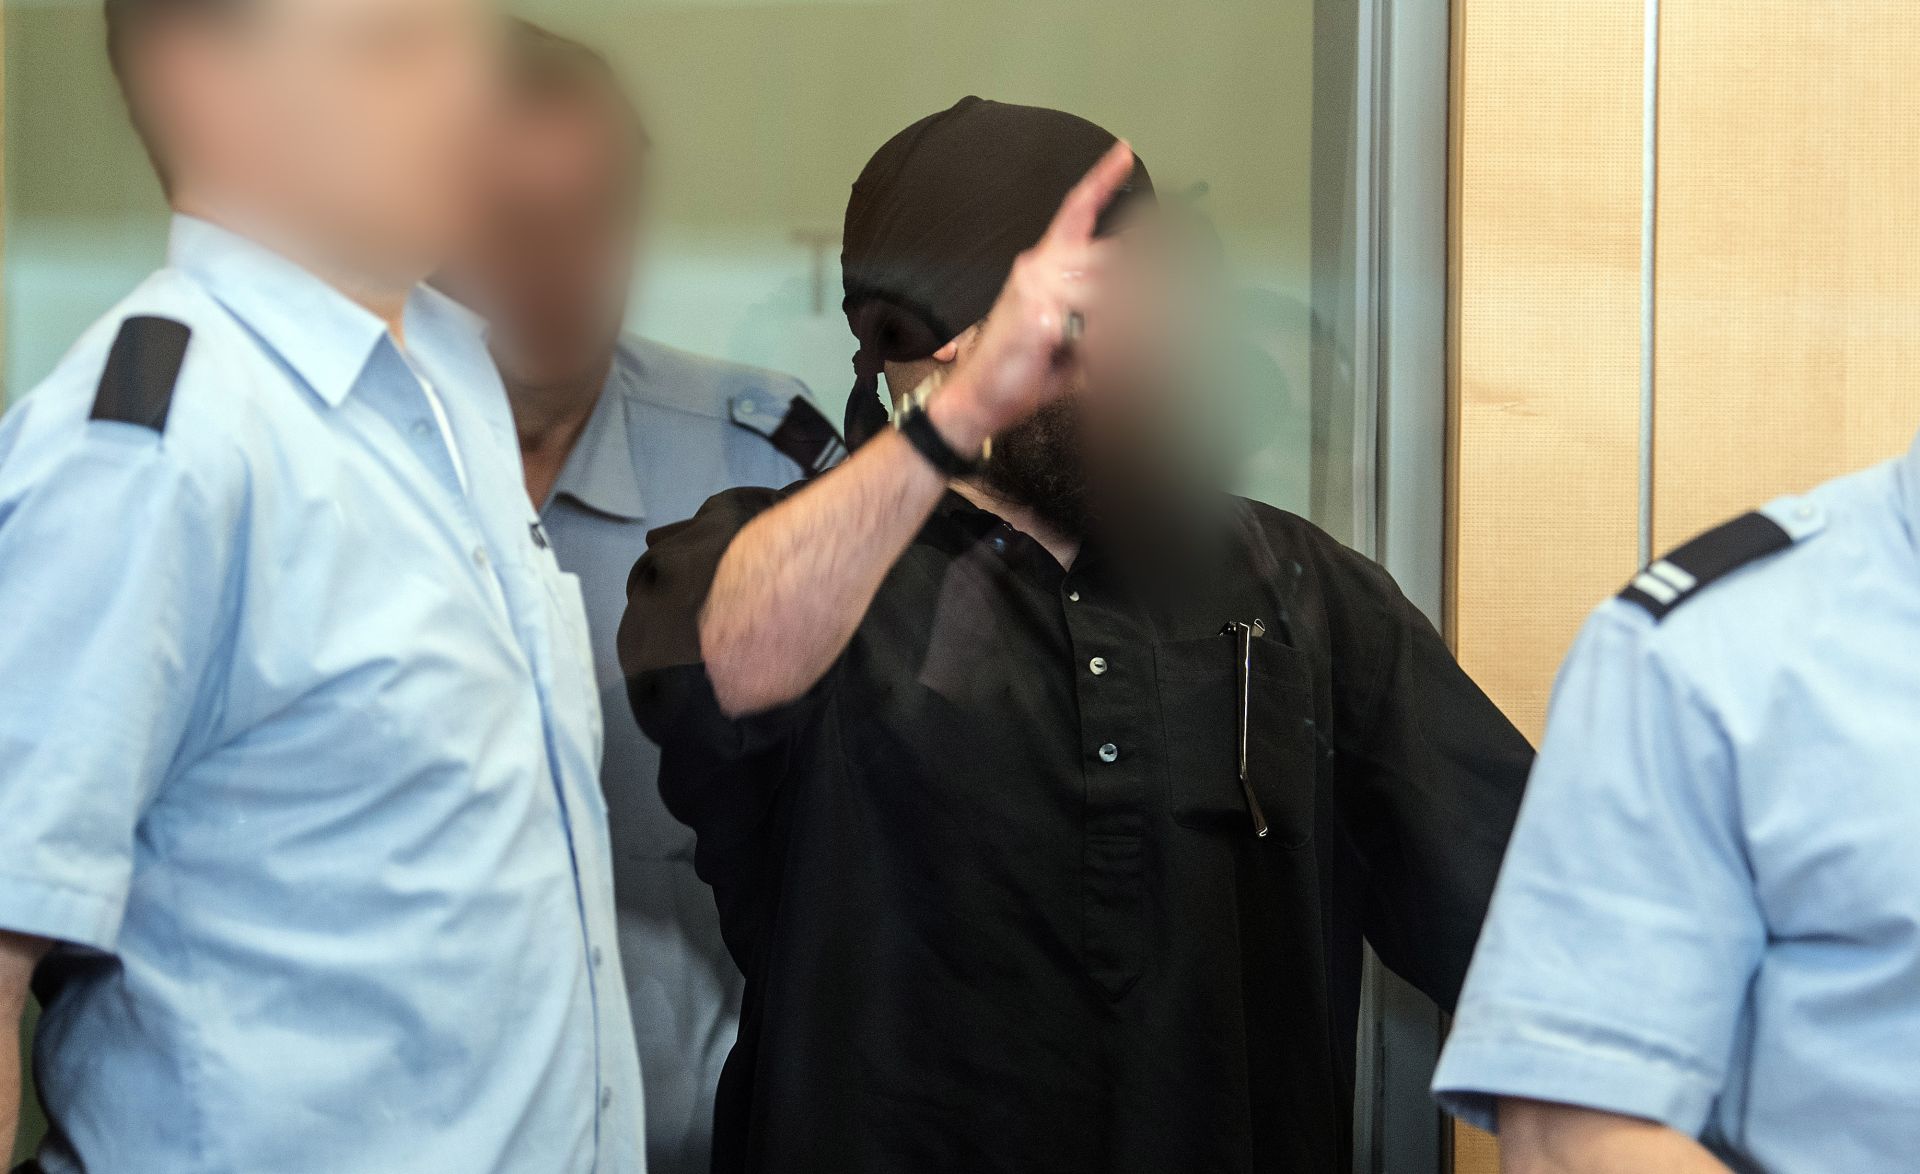 Defendant Marco G. (C) in a courtroom in Duesseldorf, Germany, 03 April 2017. The primary defendant in a terrorist trial surrounding a bomb at the central railway station in Bonn and a murder plot by Islamists was sentenced to life imprisonment. The Higher Regional Court in Duesseldorf has tried the case for more than two and a half years. 



(ATTENTION EDITORS: THE FACE OF THE DEFENDANT WAS BLURRED FOR LEGAL REASONS CONCERNING PERSONAL RIGHTS.) Photo: Federico Gambarini/dpa